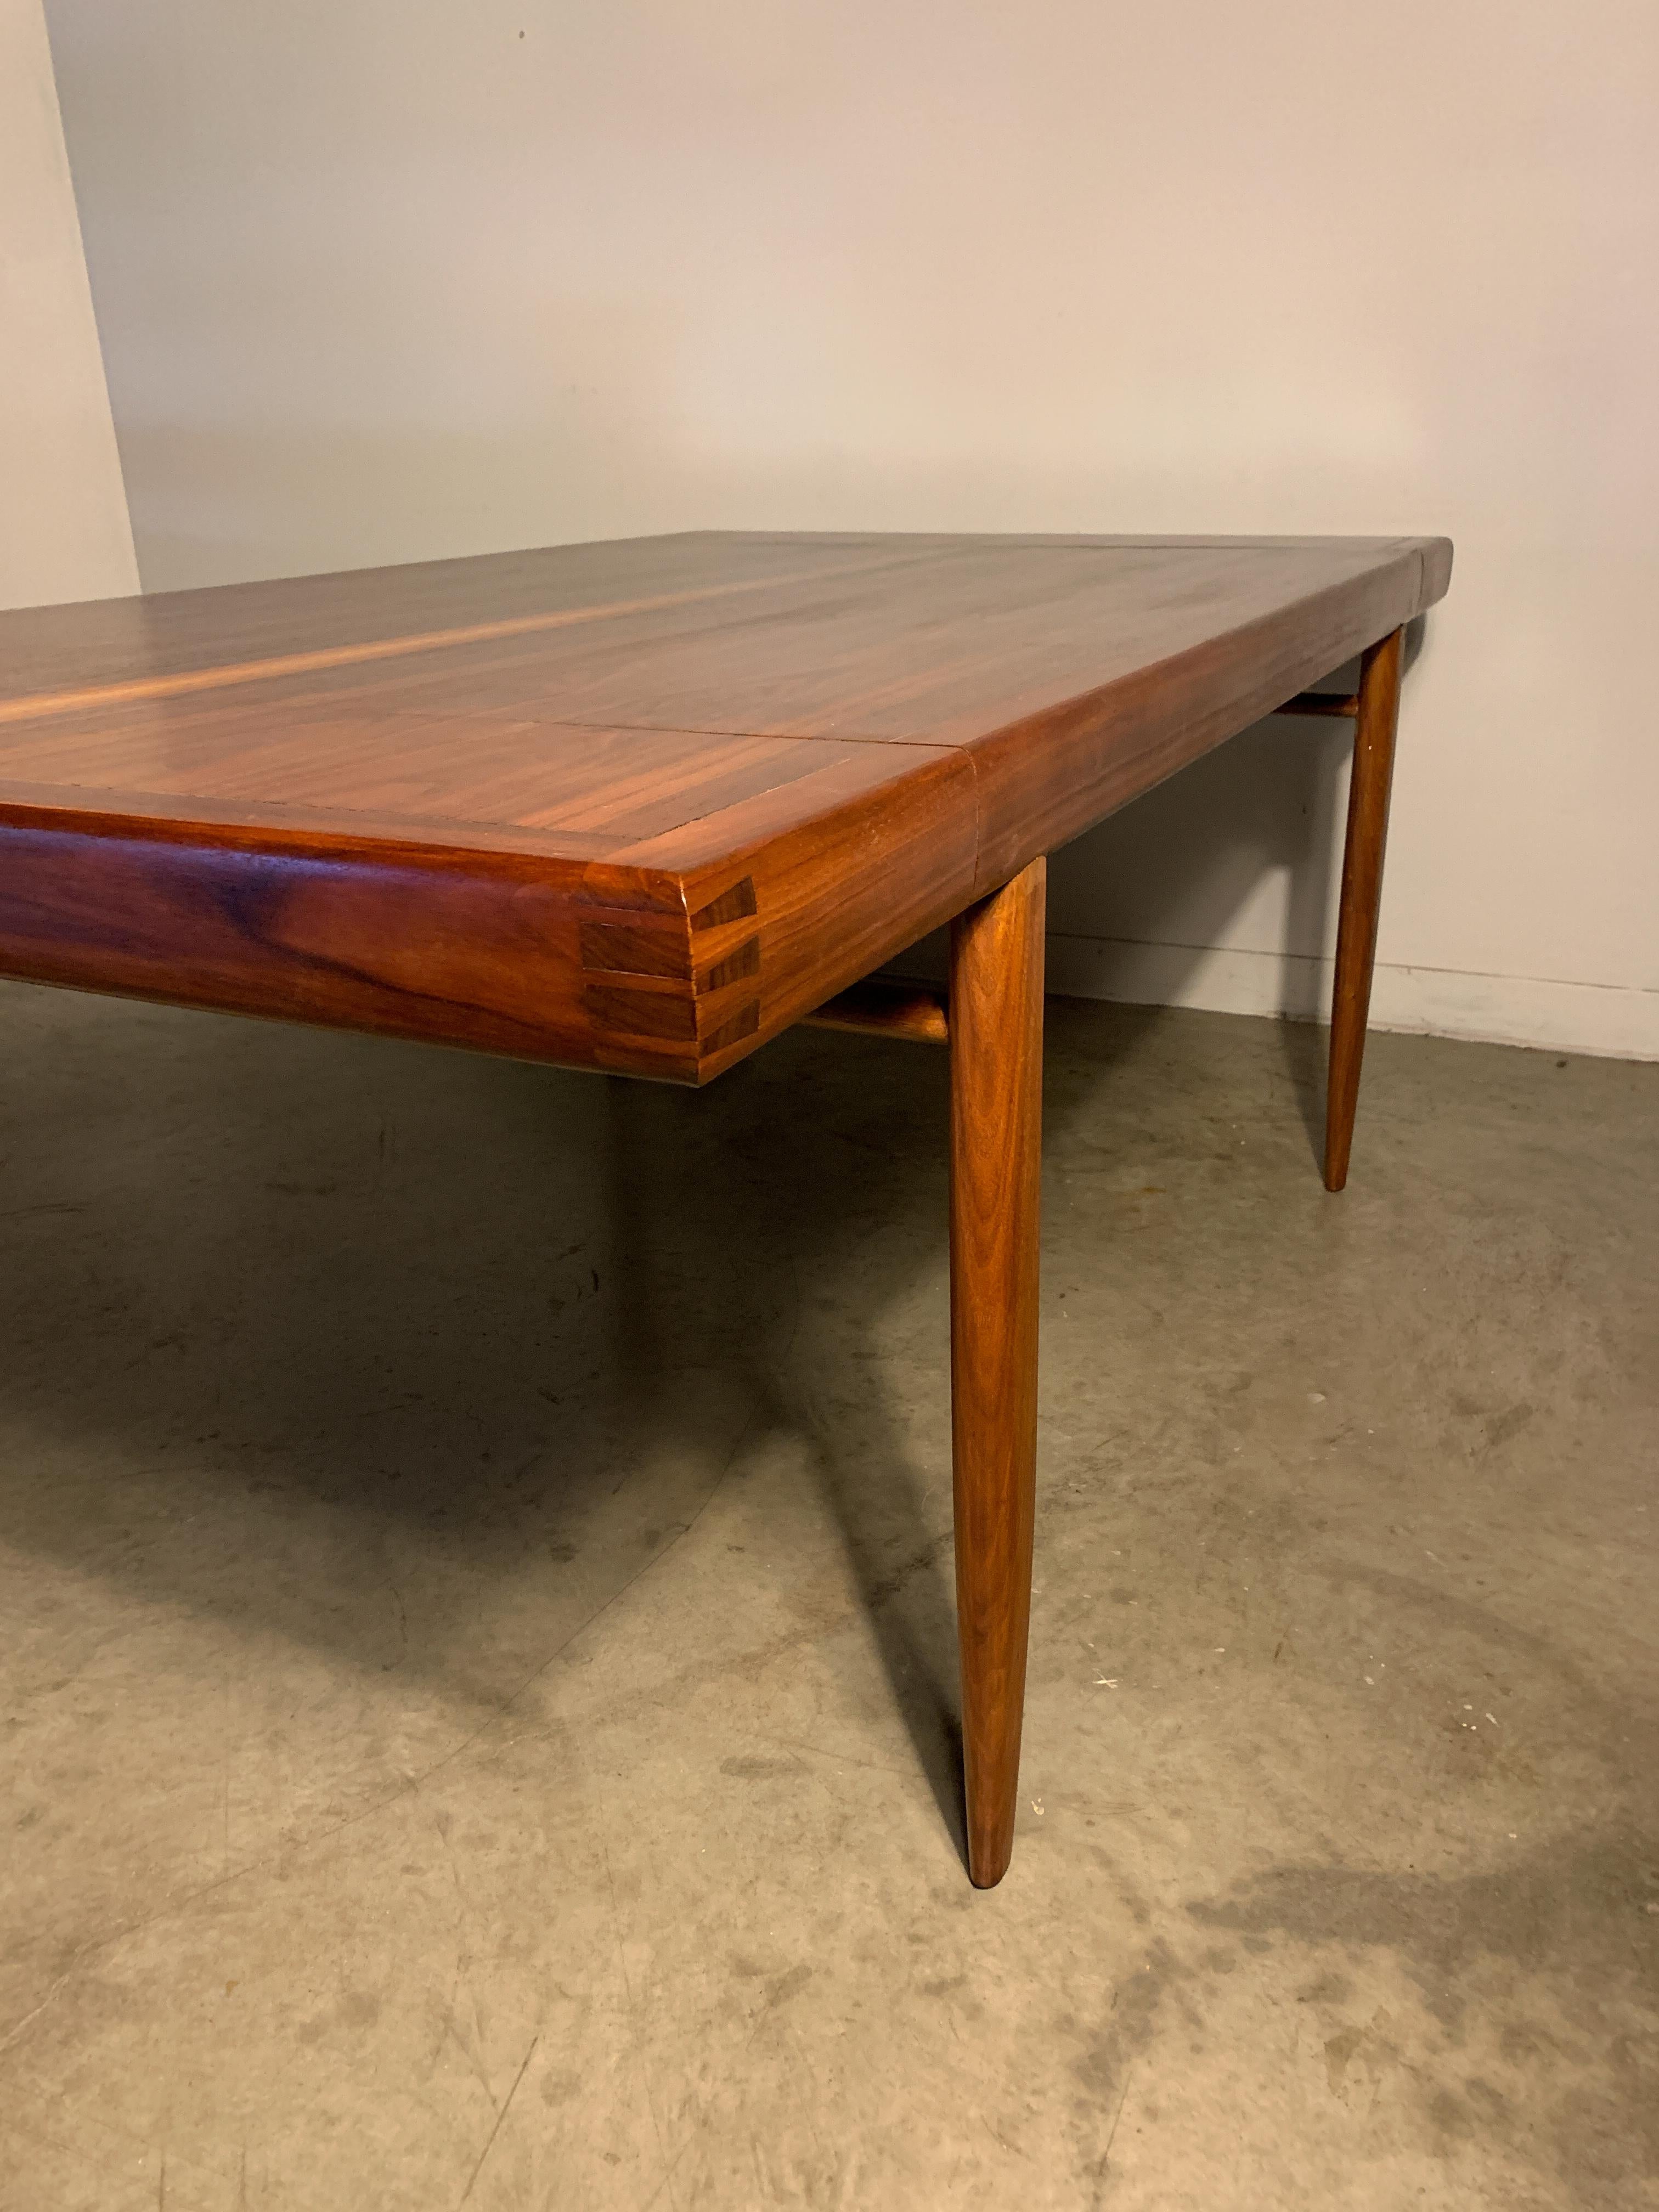 Stunning Walnut dining table designed by George Nakashima and handmade by Widdicomb Mueller craftsman in 1958. This table was one of the key pieces for the Origins collection and graced the cover of an issue of House Beautiful dedicated to the line.